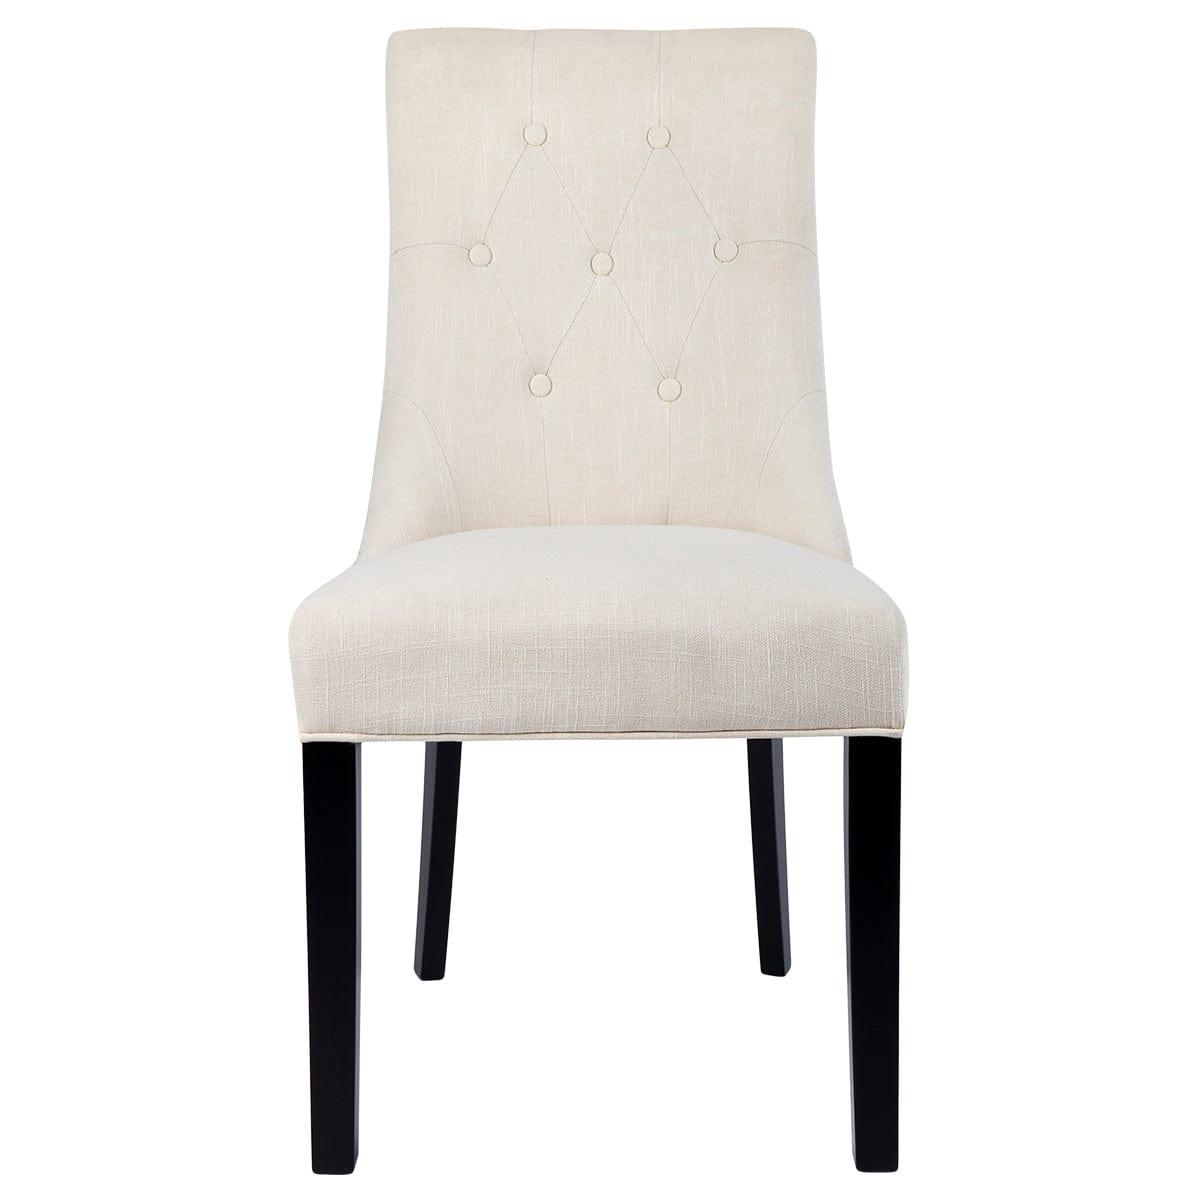 House Journey London Dining Chair - Natural Linen